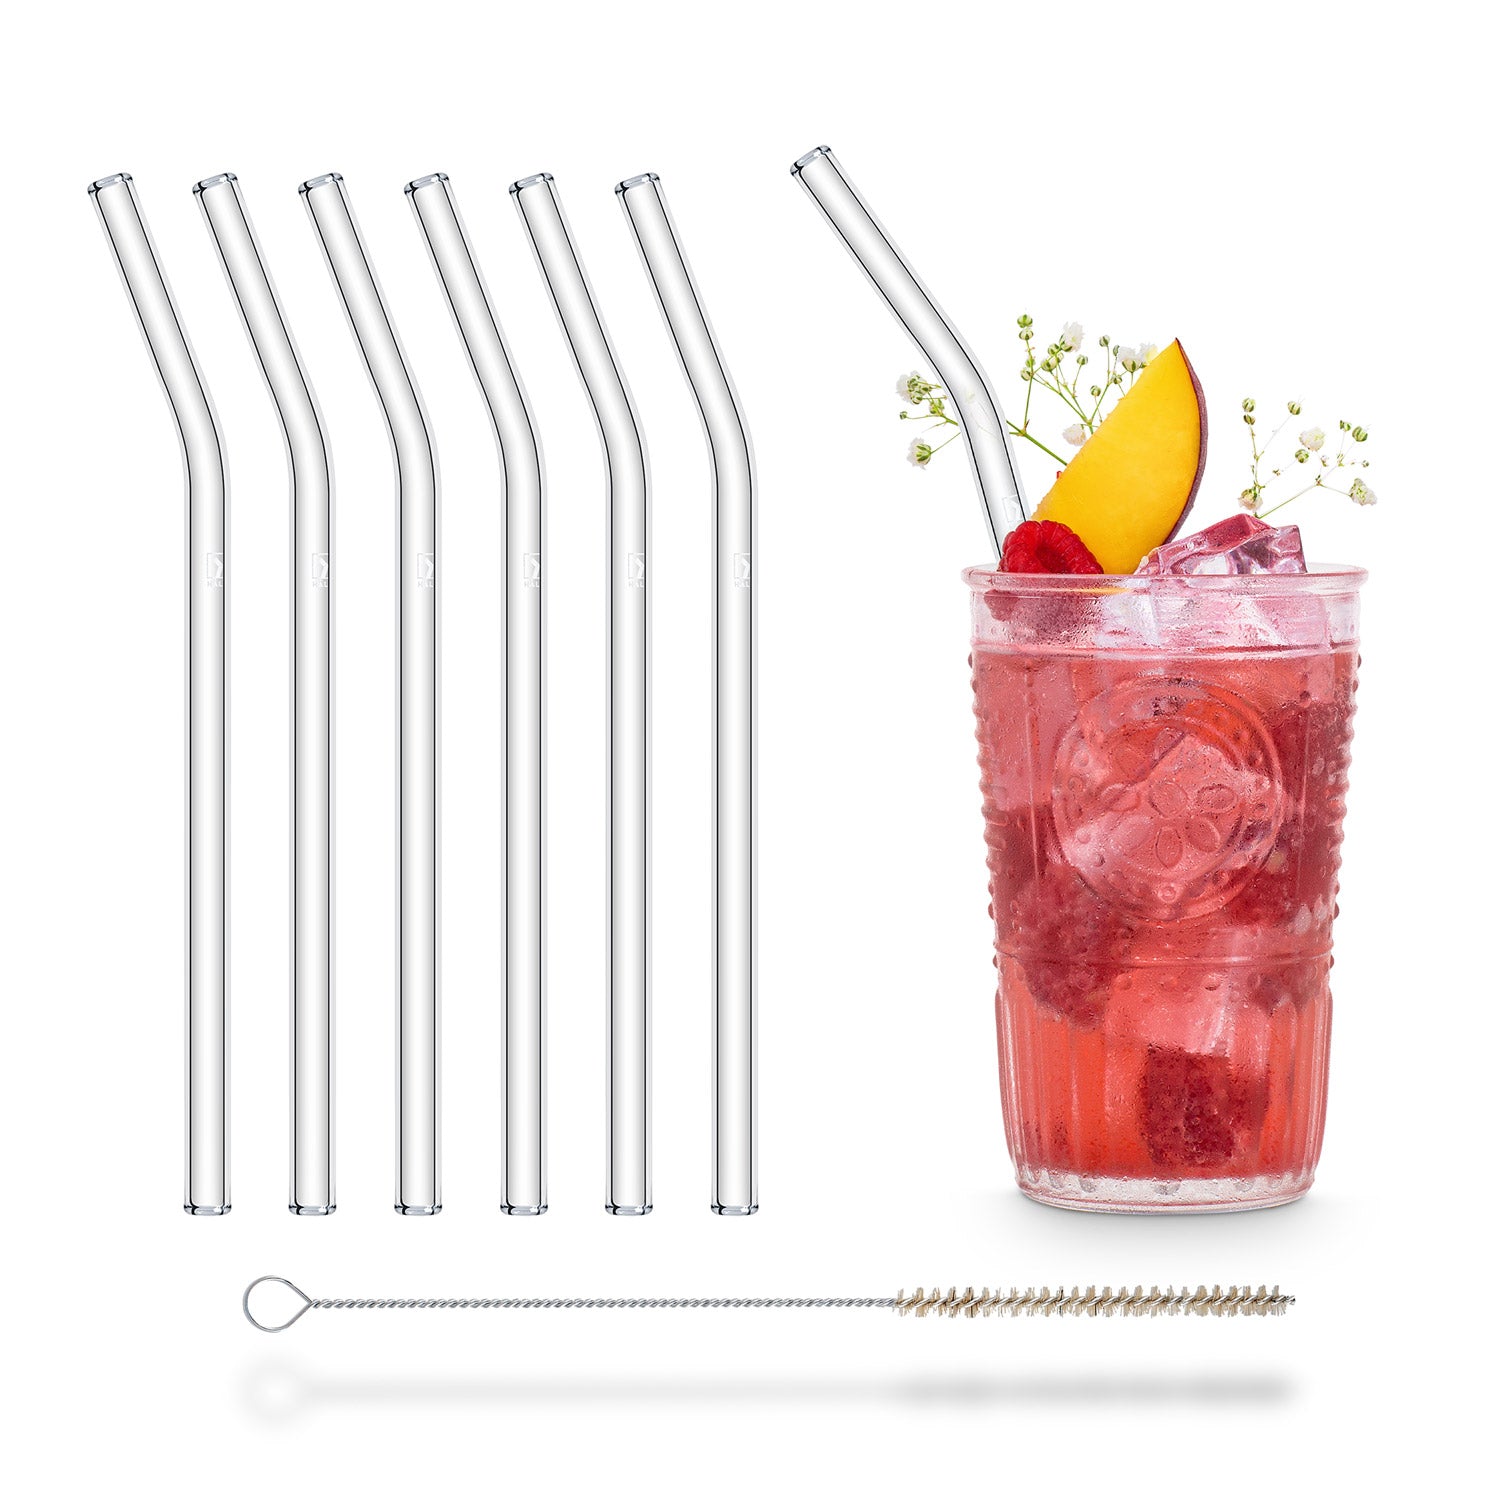 Halm Glass Straws - 6 Long 12 inch Bent Reusable Drinking Straws +  Plastic-Free Cleaning Brush - Perfect for Bottles - 30 cm Made in Germany 